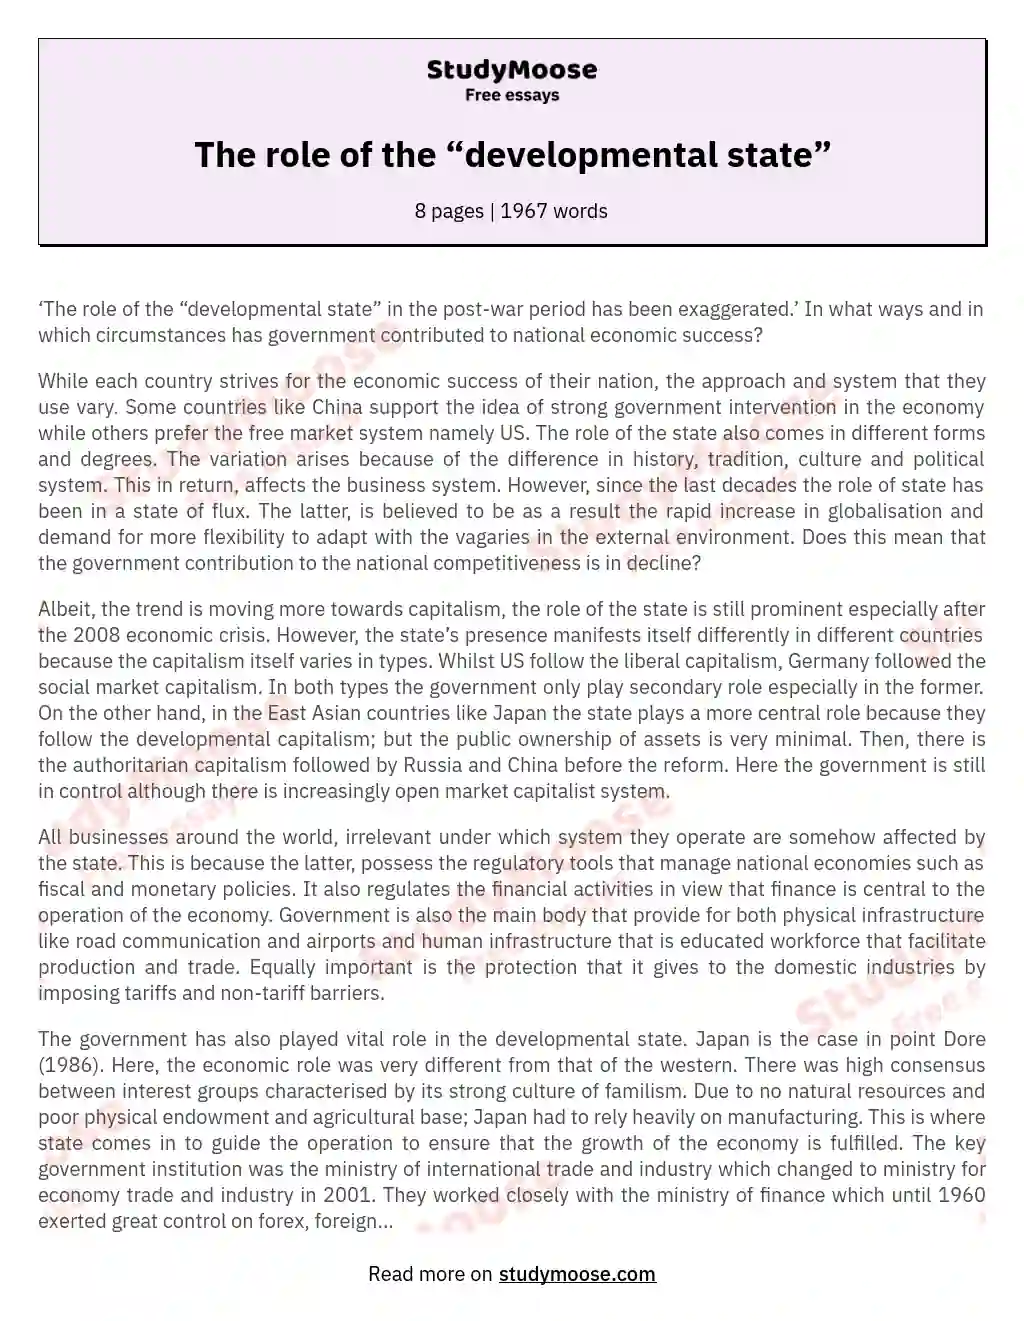 The role of the “developmental state” essay